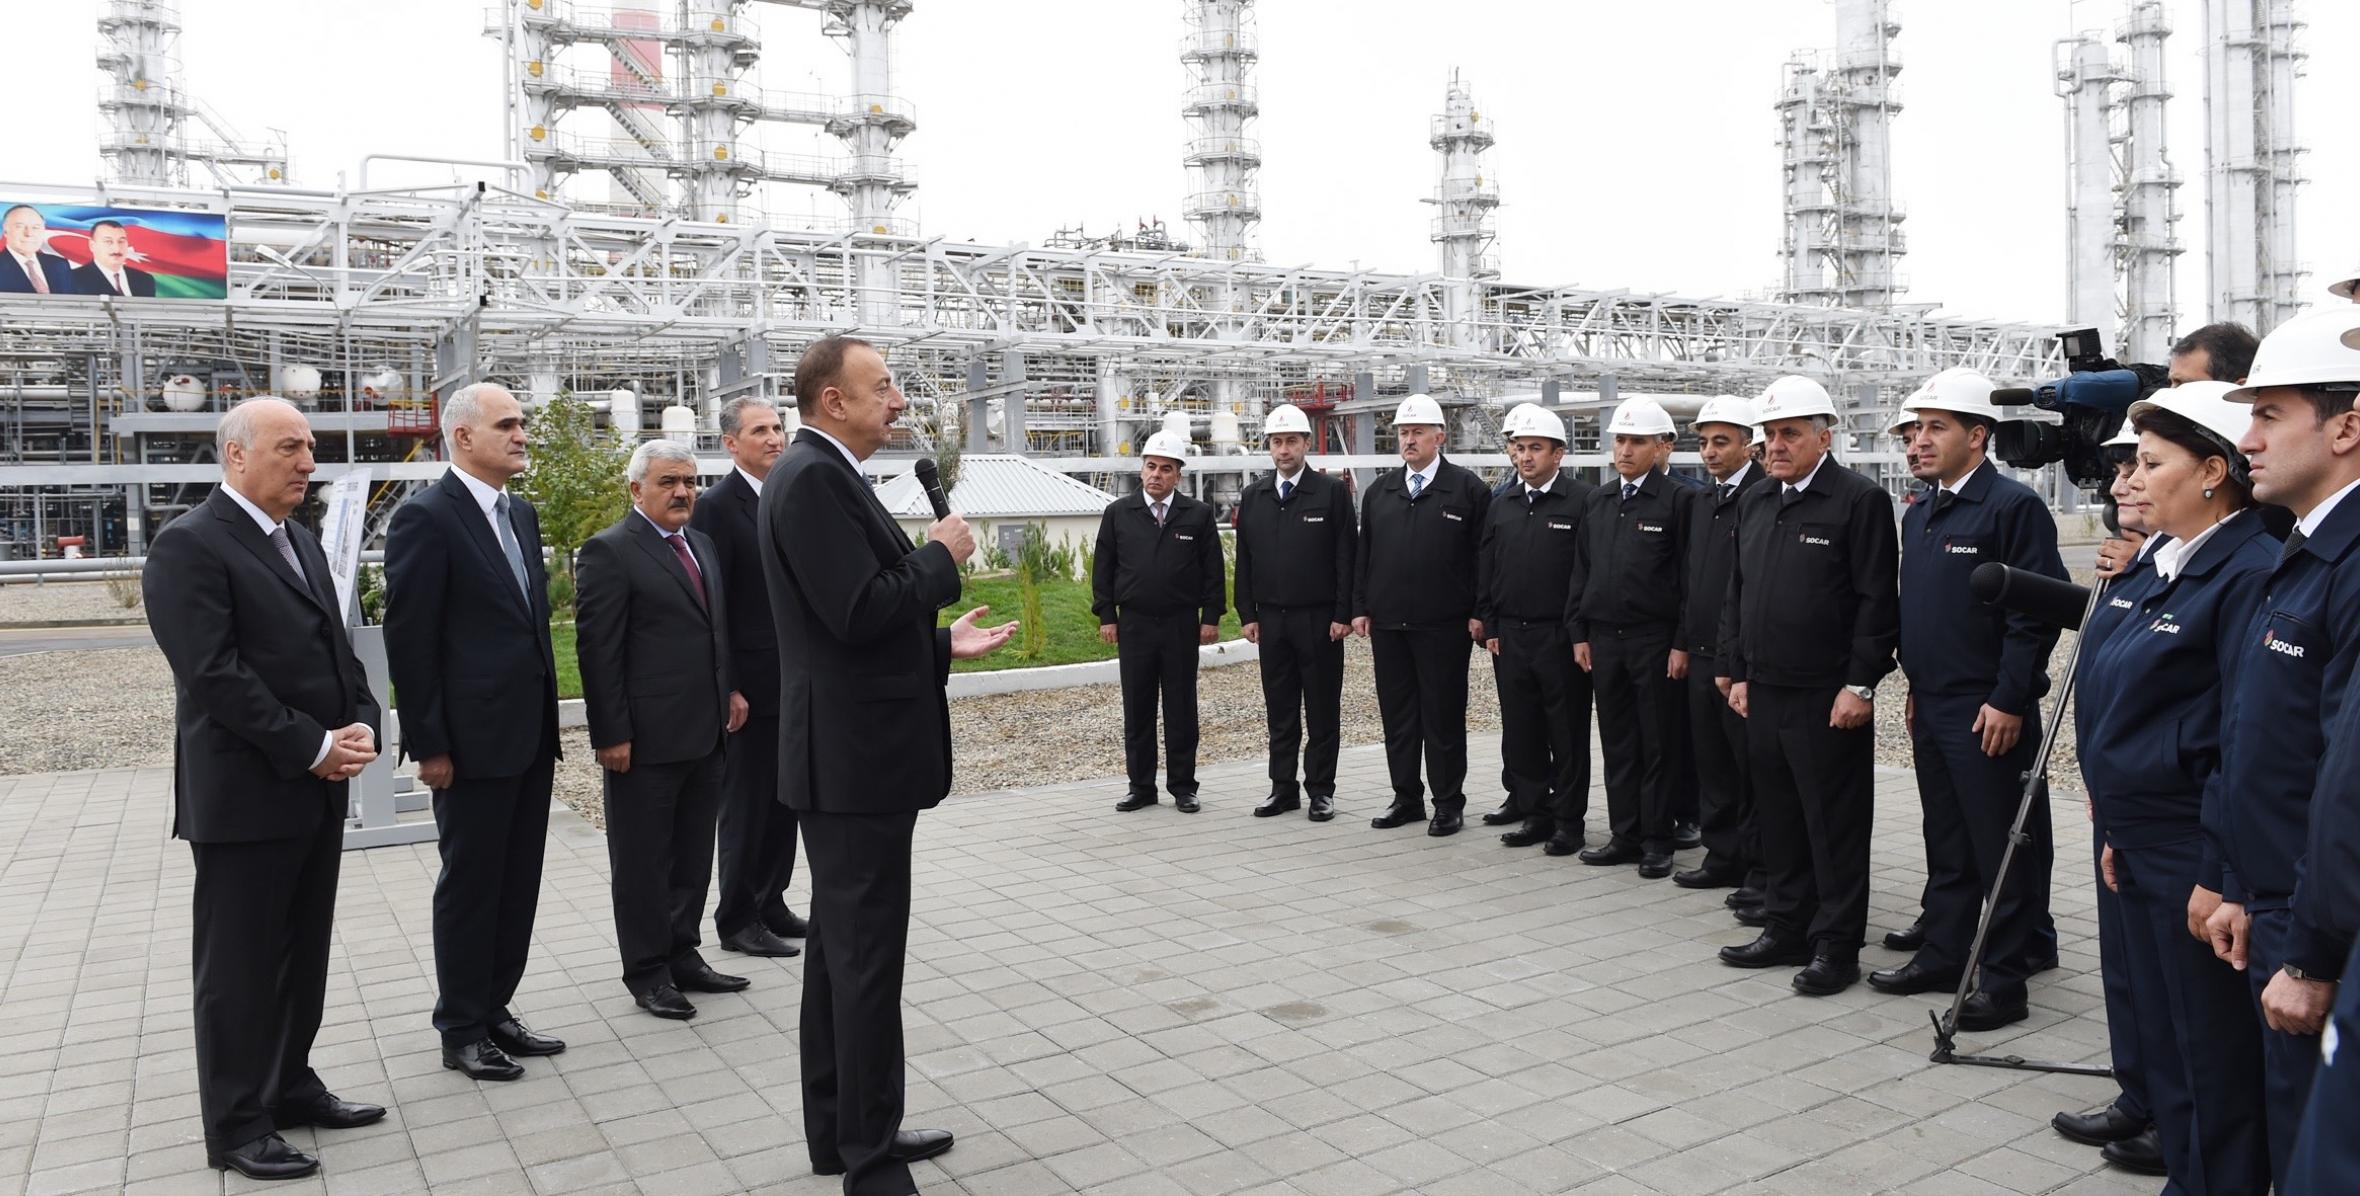 Ilham Aliyev launched new installations in the Ethylene and Polyethylene Plant in Sumgayit